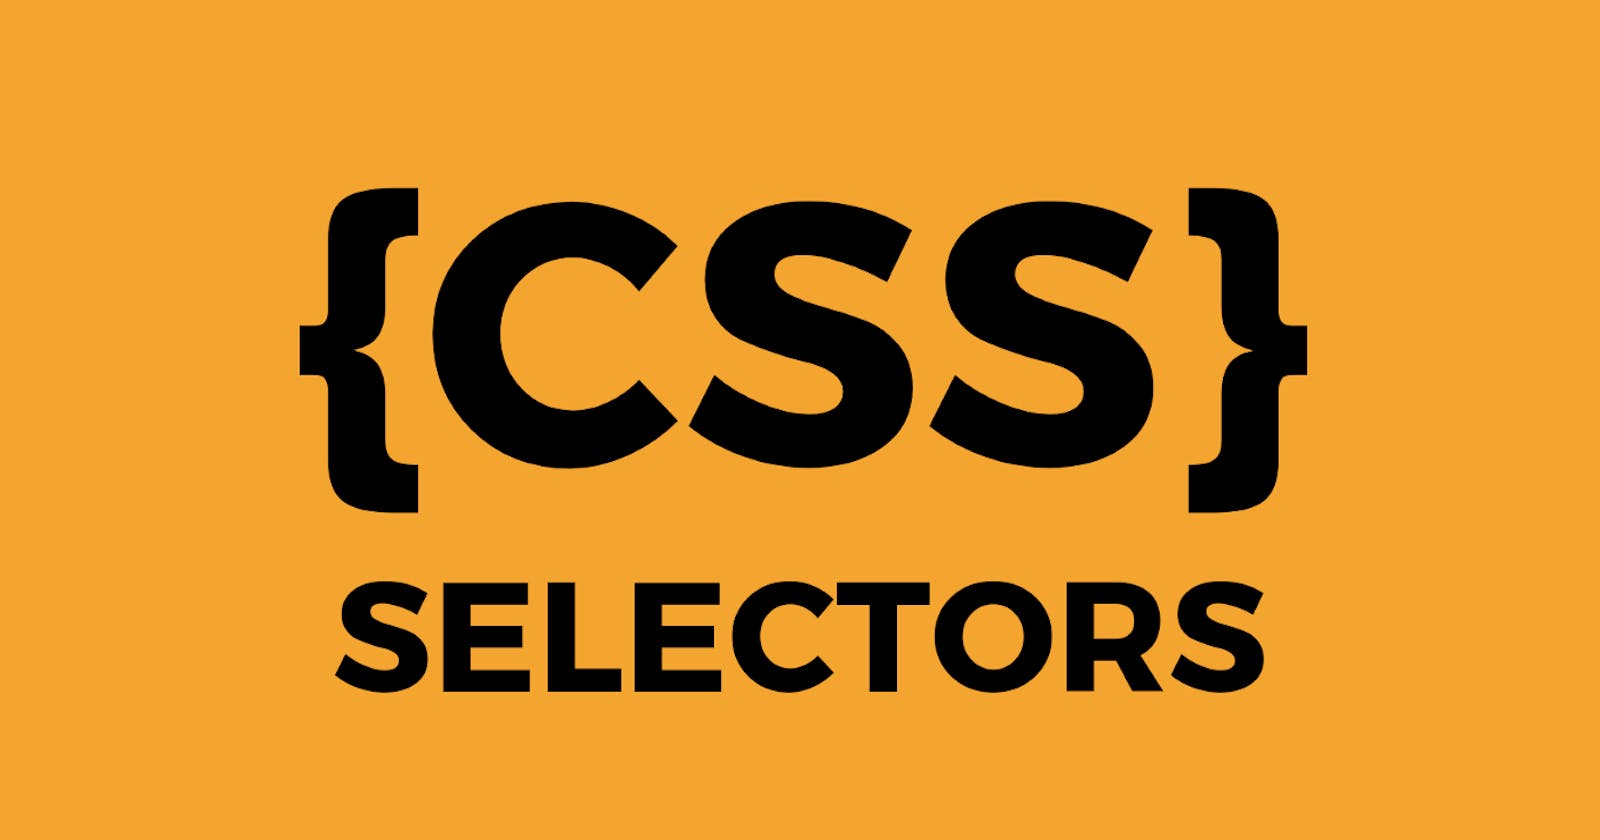 Guide To CSS Selector